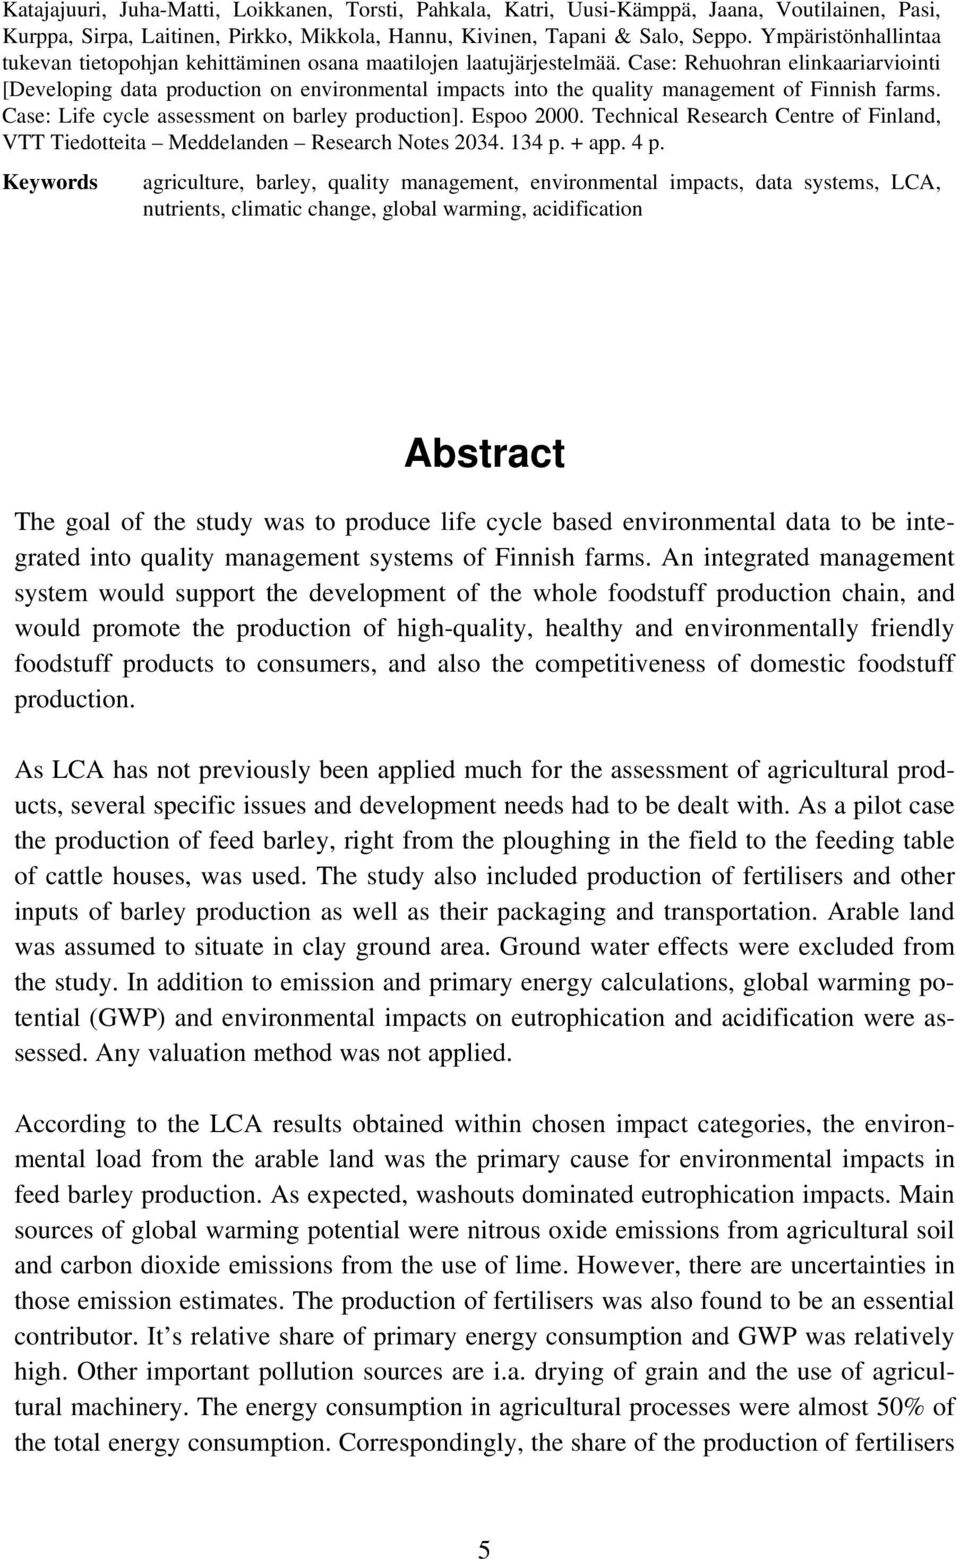 Case: Rehuohran elinkaariarviointi [Developing data production on environmental impacts into the quality management of Finnish farms. Case: Life cycle assessment on barley production]. Espoo 2000.